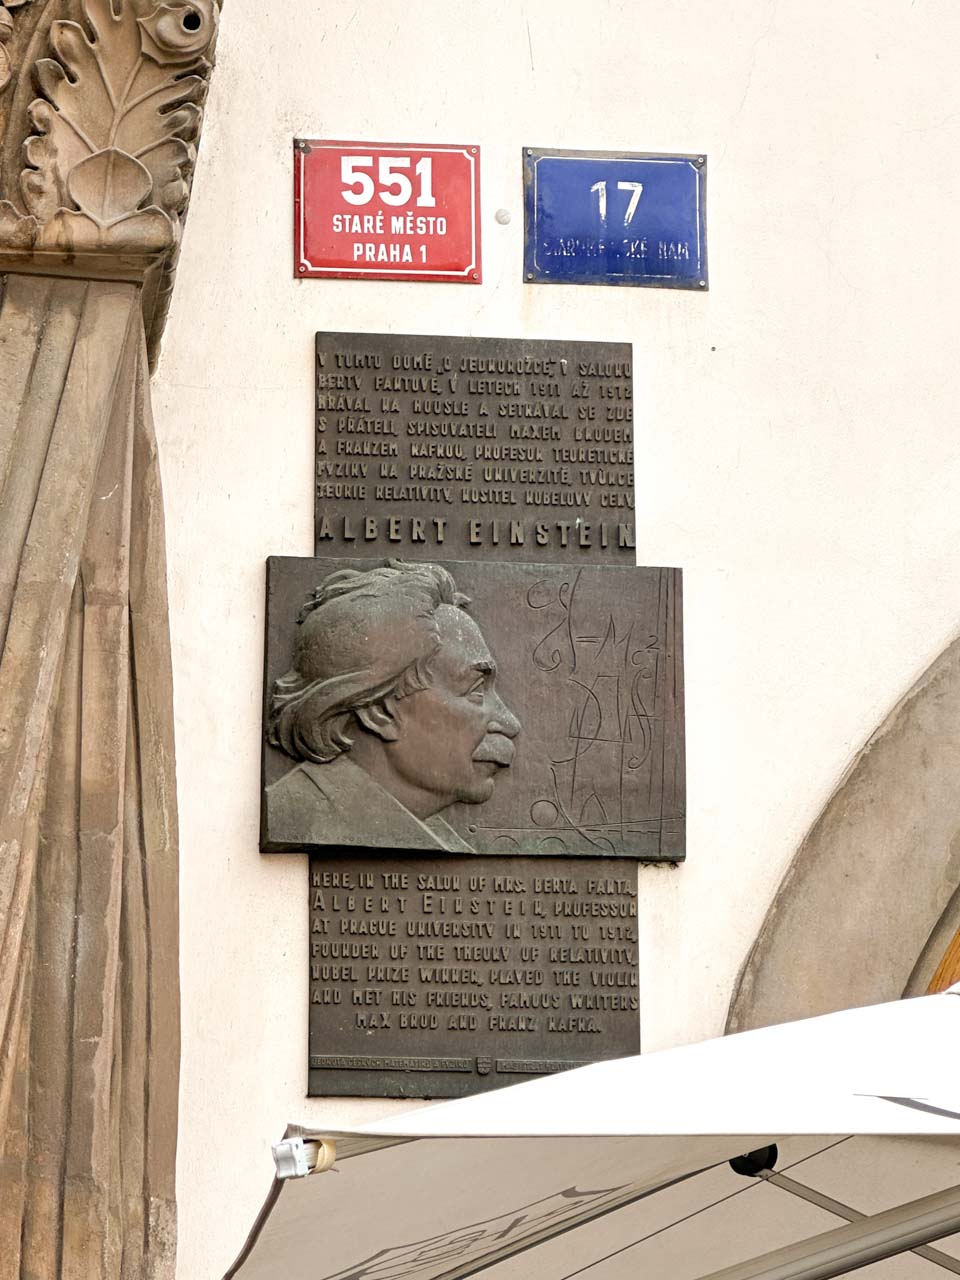 Plaque marking the place where Albert Einstein used to meet his friends, Max Brod and Franz Kafka